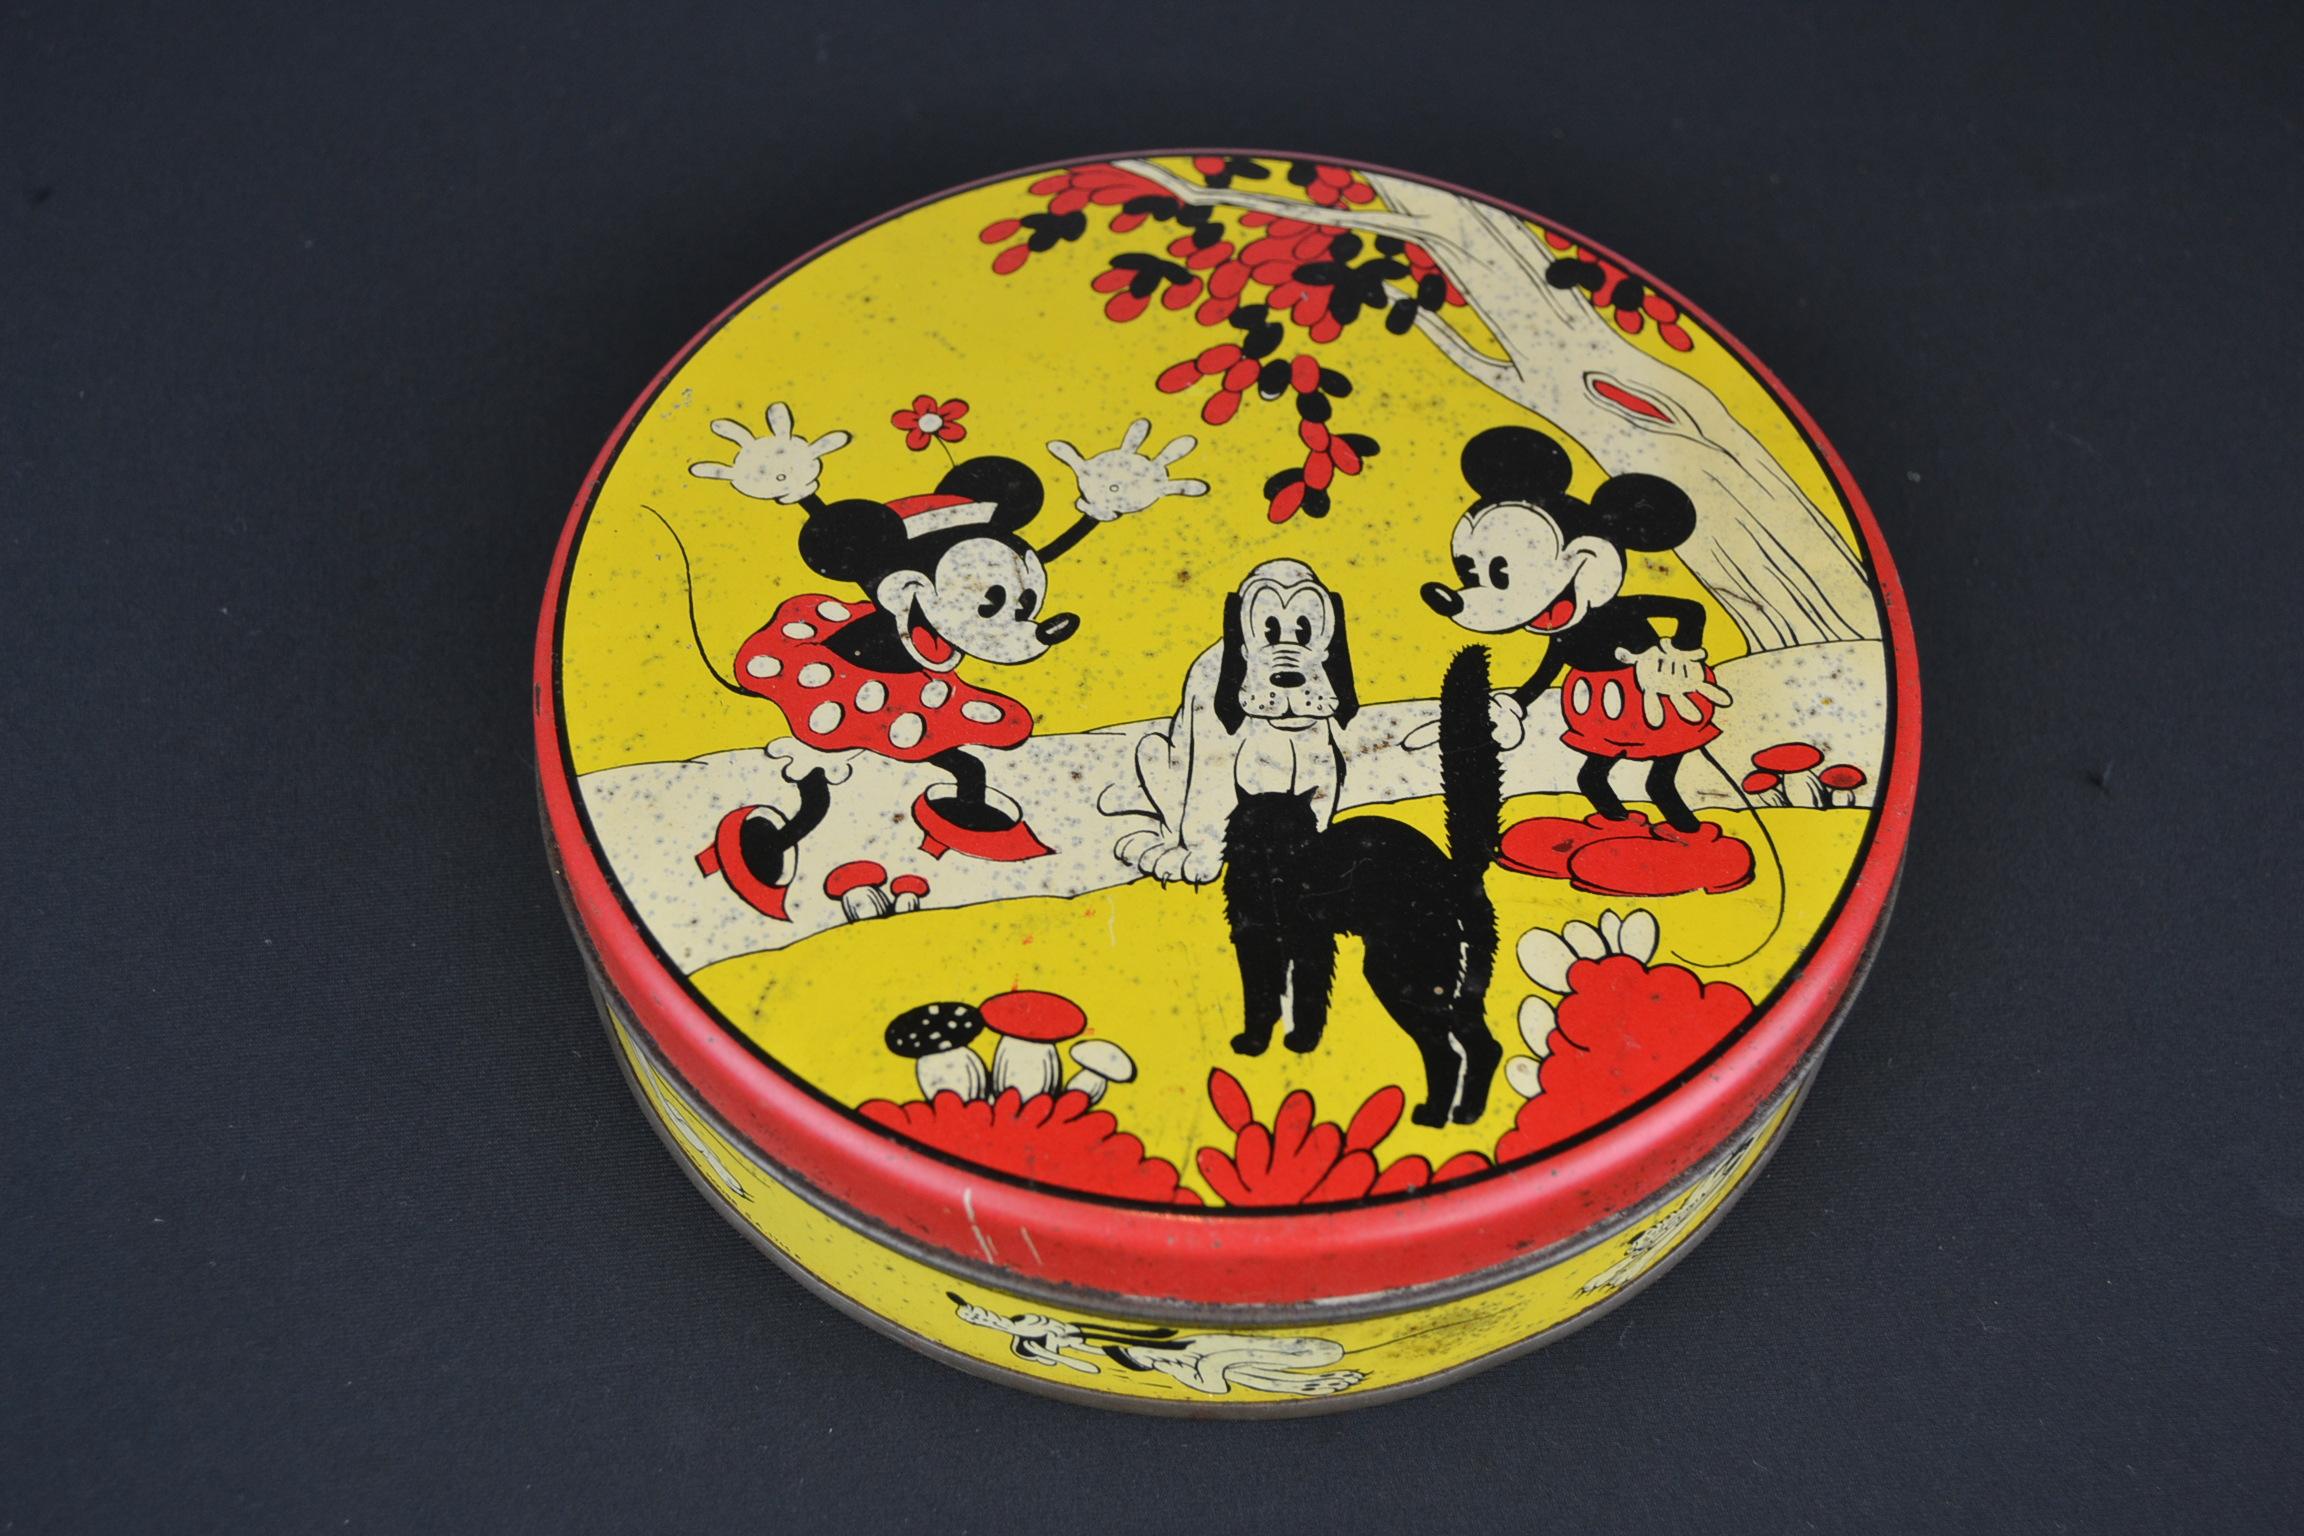 1930s Walt Disney Tin with Mickey Mouse, Minnie Mouse, Pluto and Cat.
This Lithographic yellow round tin has beautiful images with the famous Walt Disney Animation Characters. 
Combination of red, yellow and black colors. 
Mickey, Minnie and Pluto